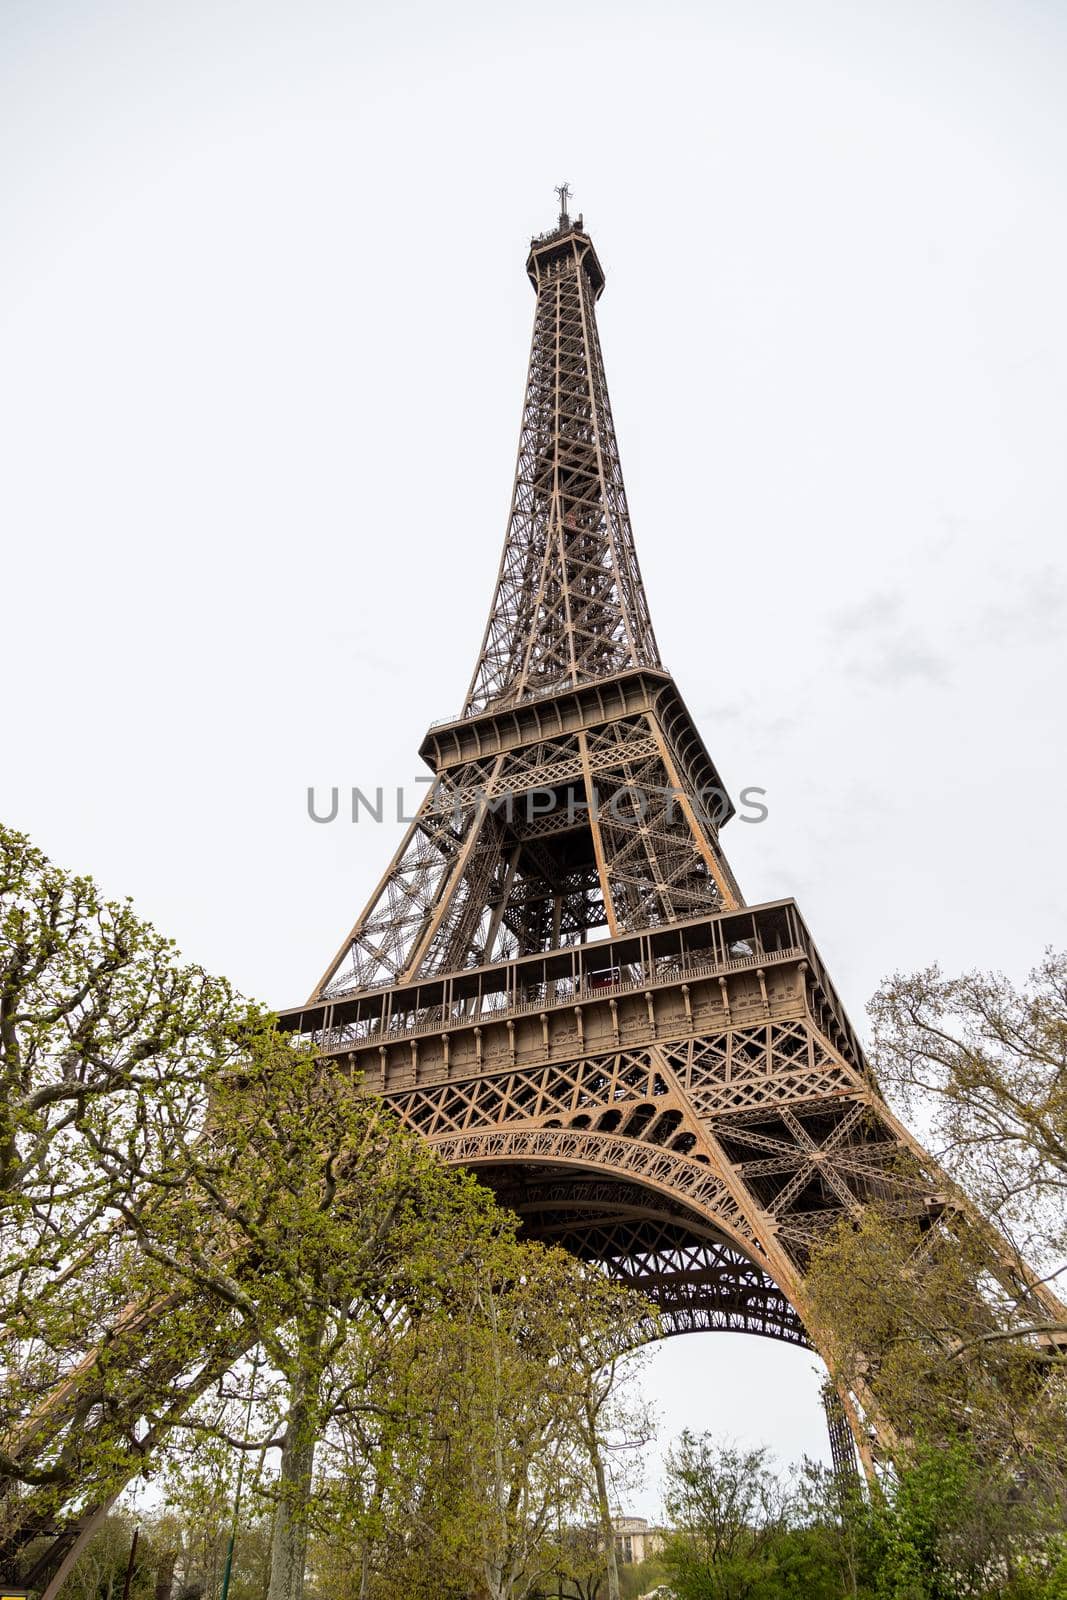 View at Eiffel Tower in Paris with trees in the foreground by reinerc